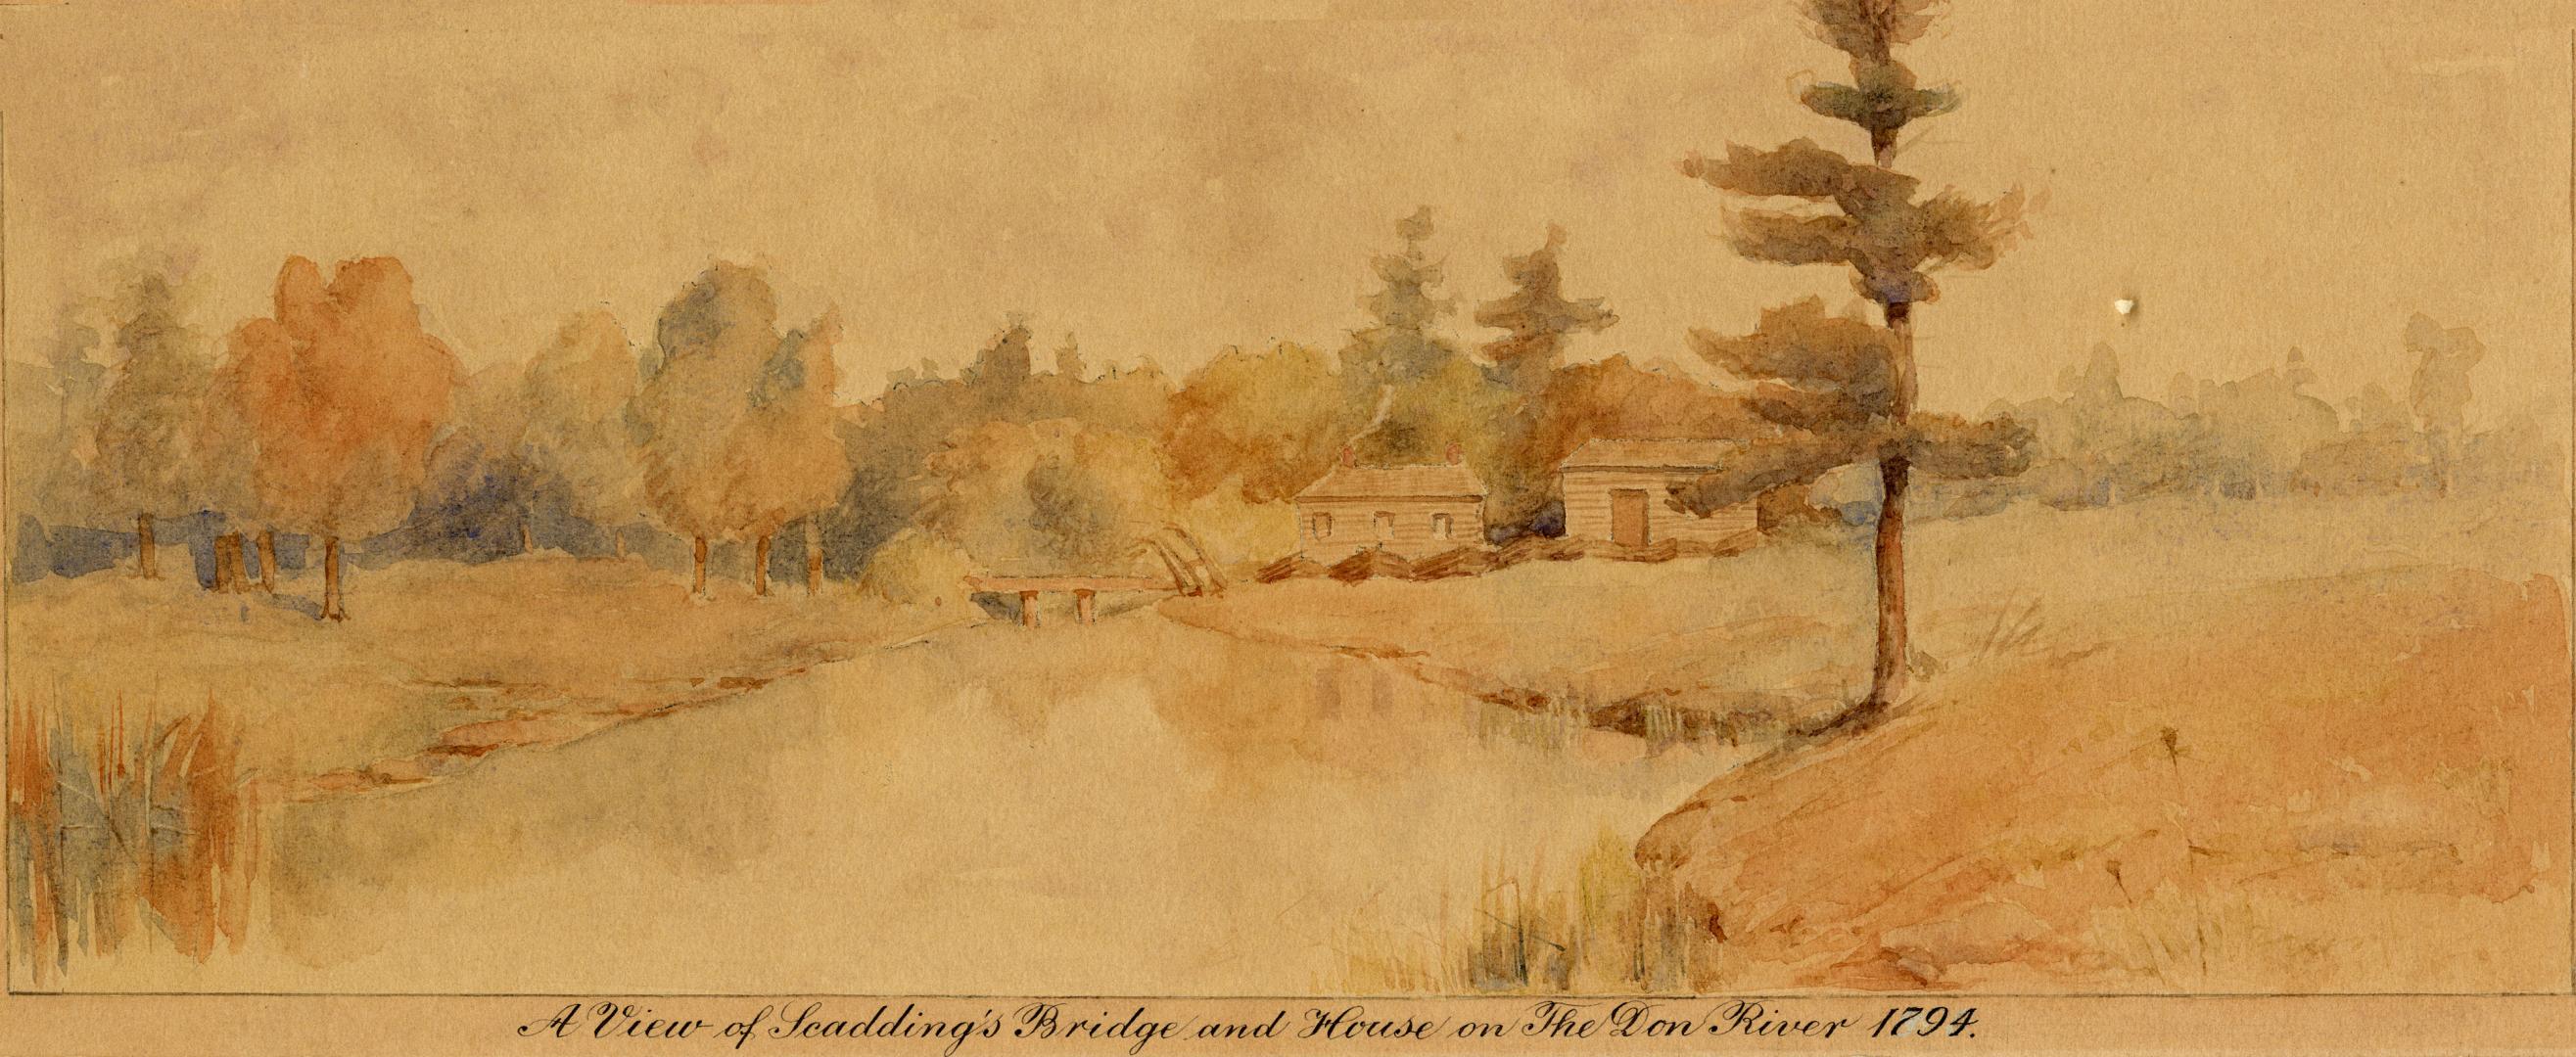 A View of Scadding's Bridge and House on the Don River, Toronto